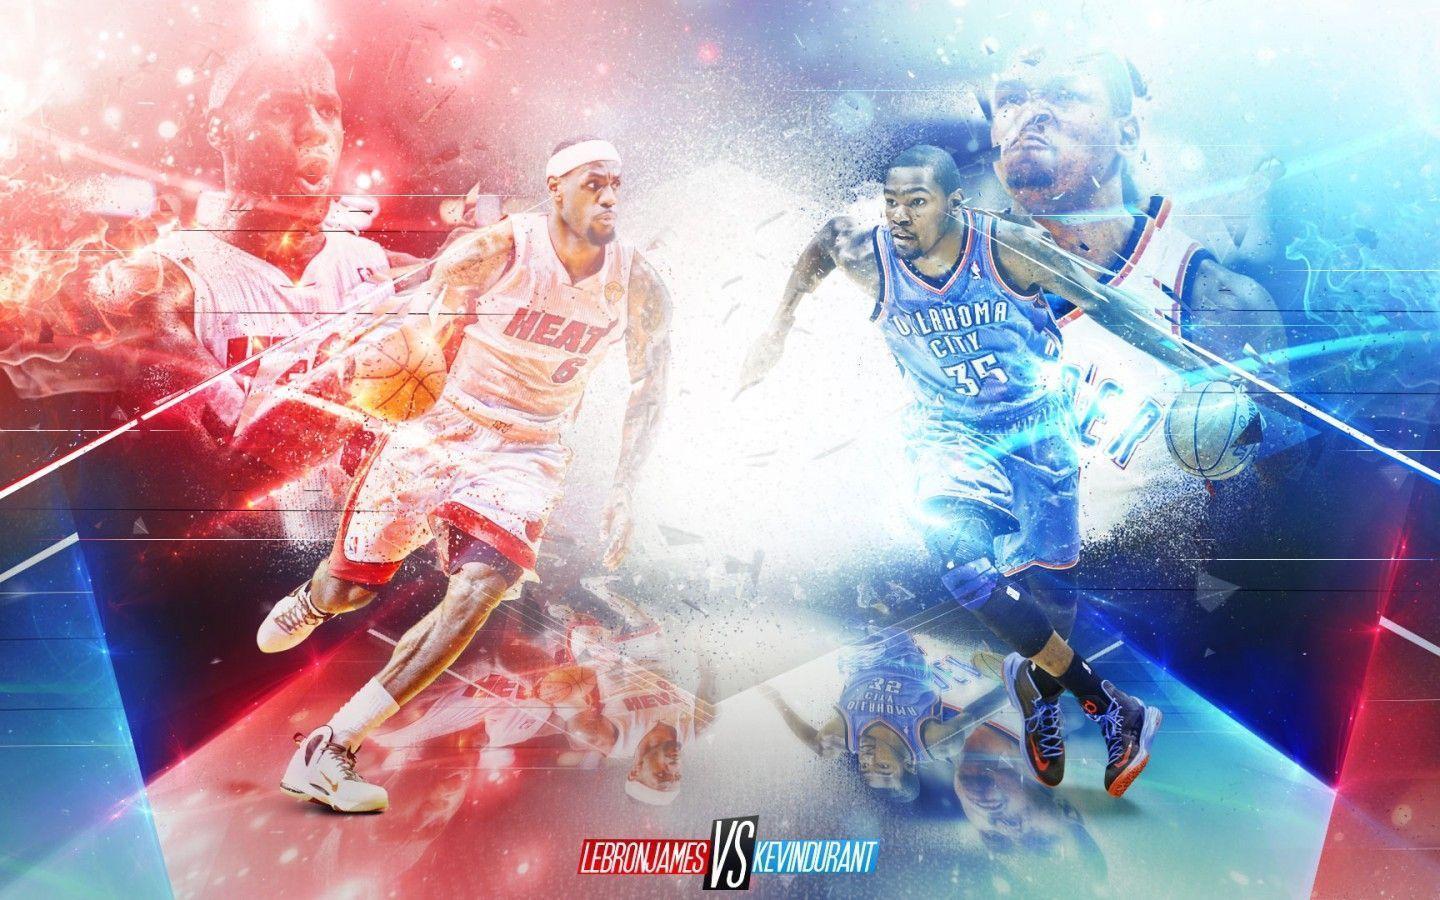 LeBron James vs Kevin Durant 2014 NBA Wallpaper Wide or HD. Male